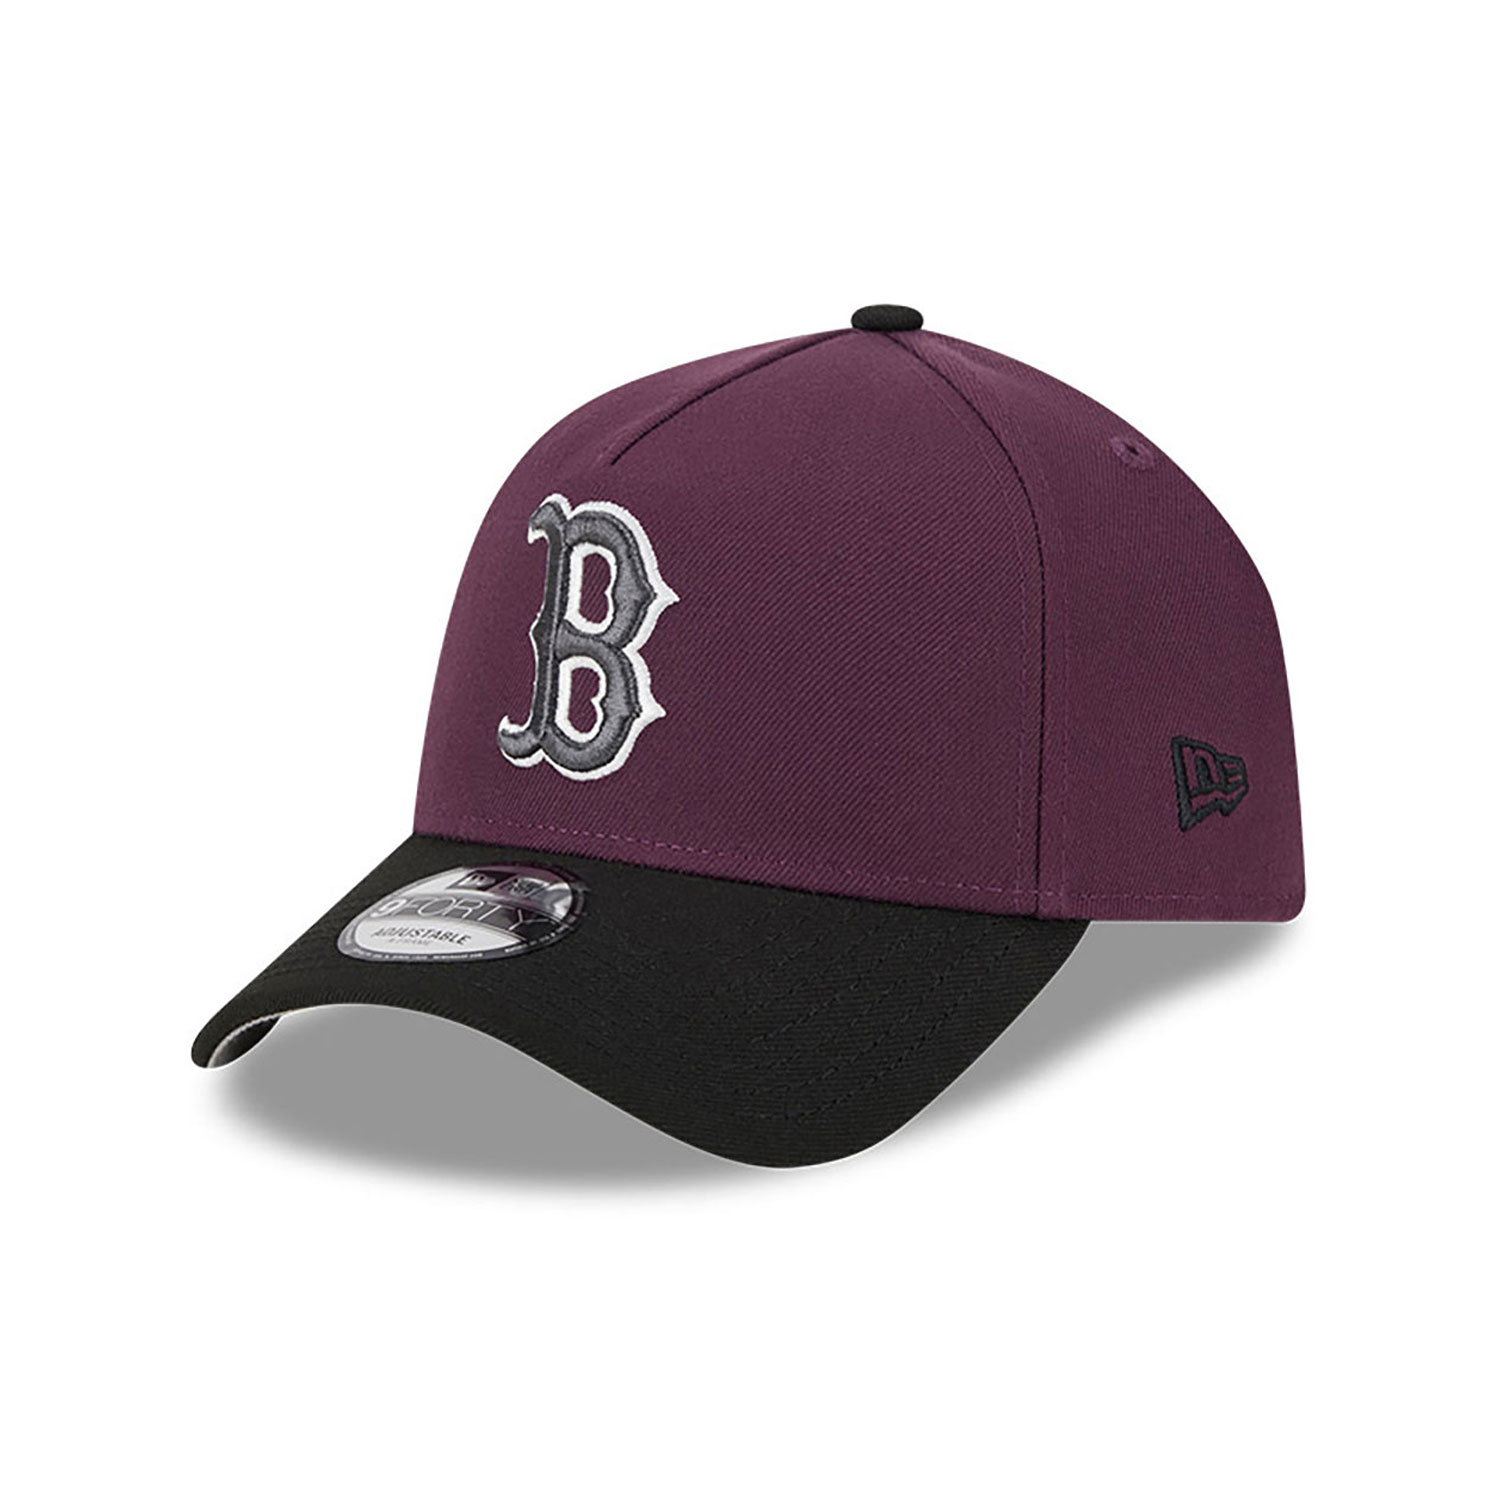 Boston Red Sox Two-Tone Dark Purple 9FORTY A-Frame Adjustable Cap